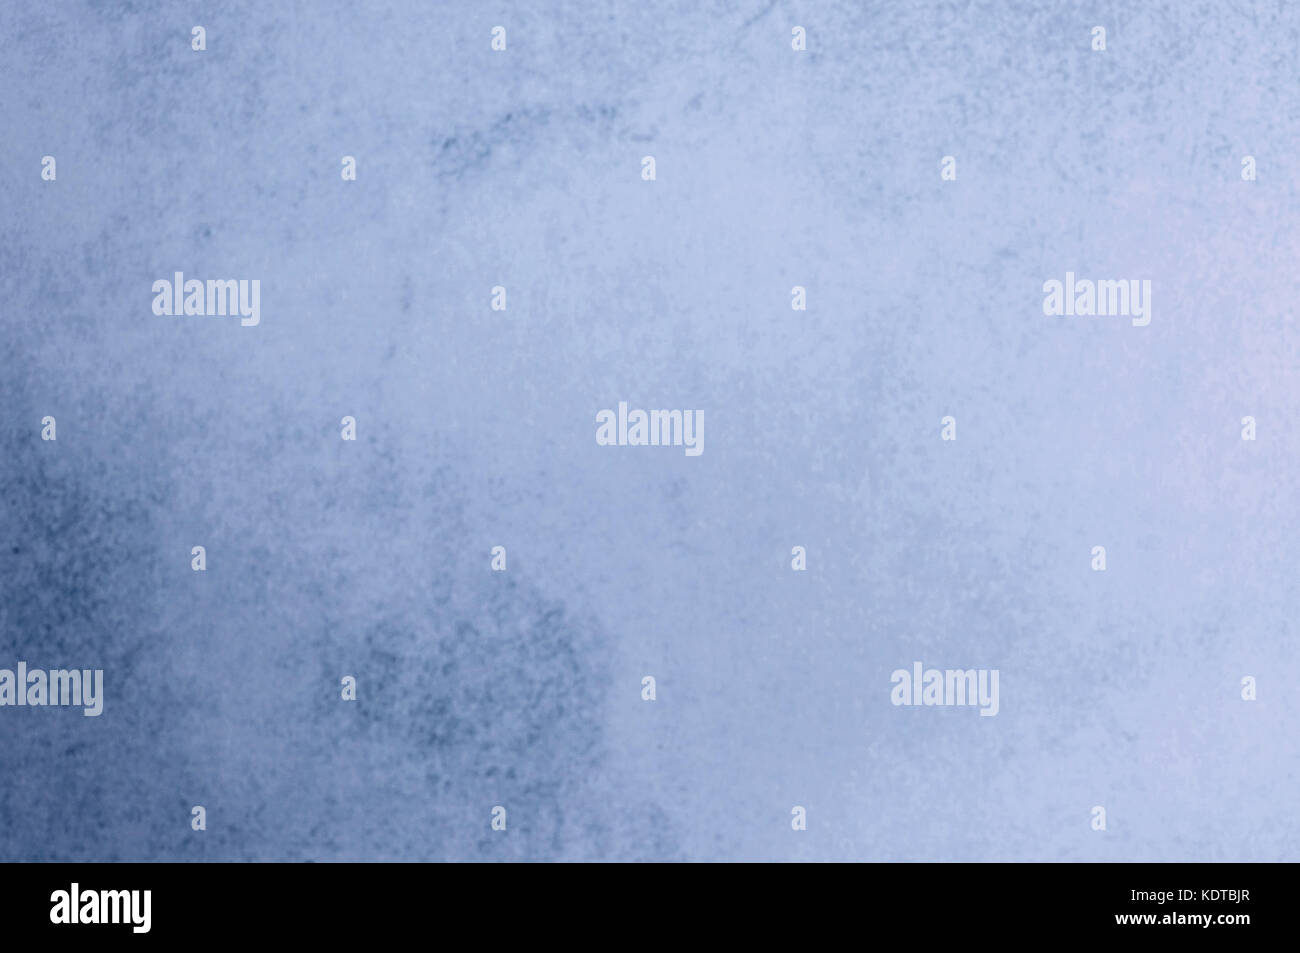 Mottled Faded Blue and Grey Background Wallpaper Stock Photo - Alamy